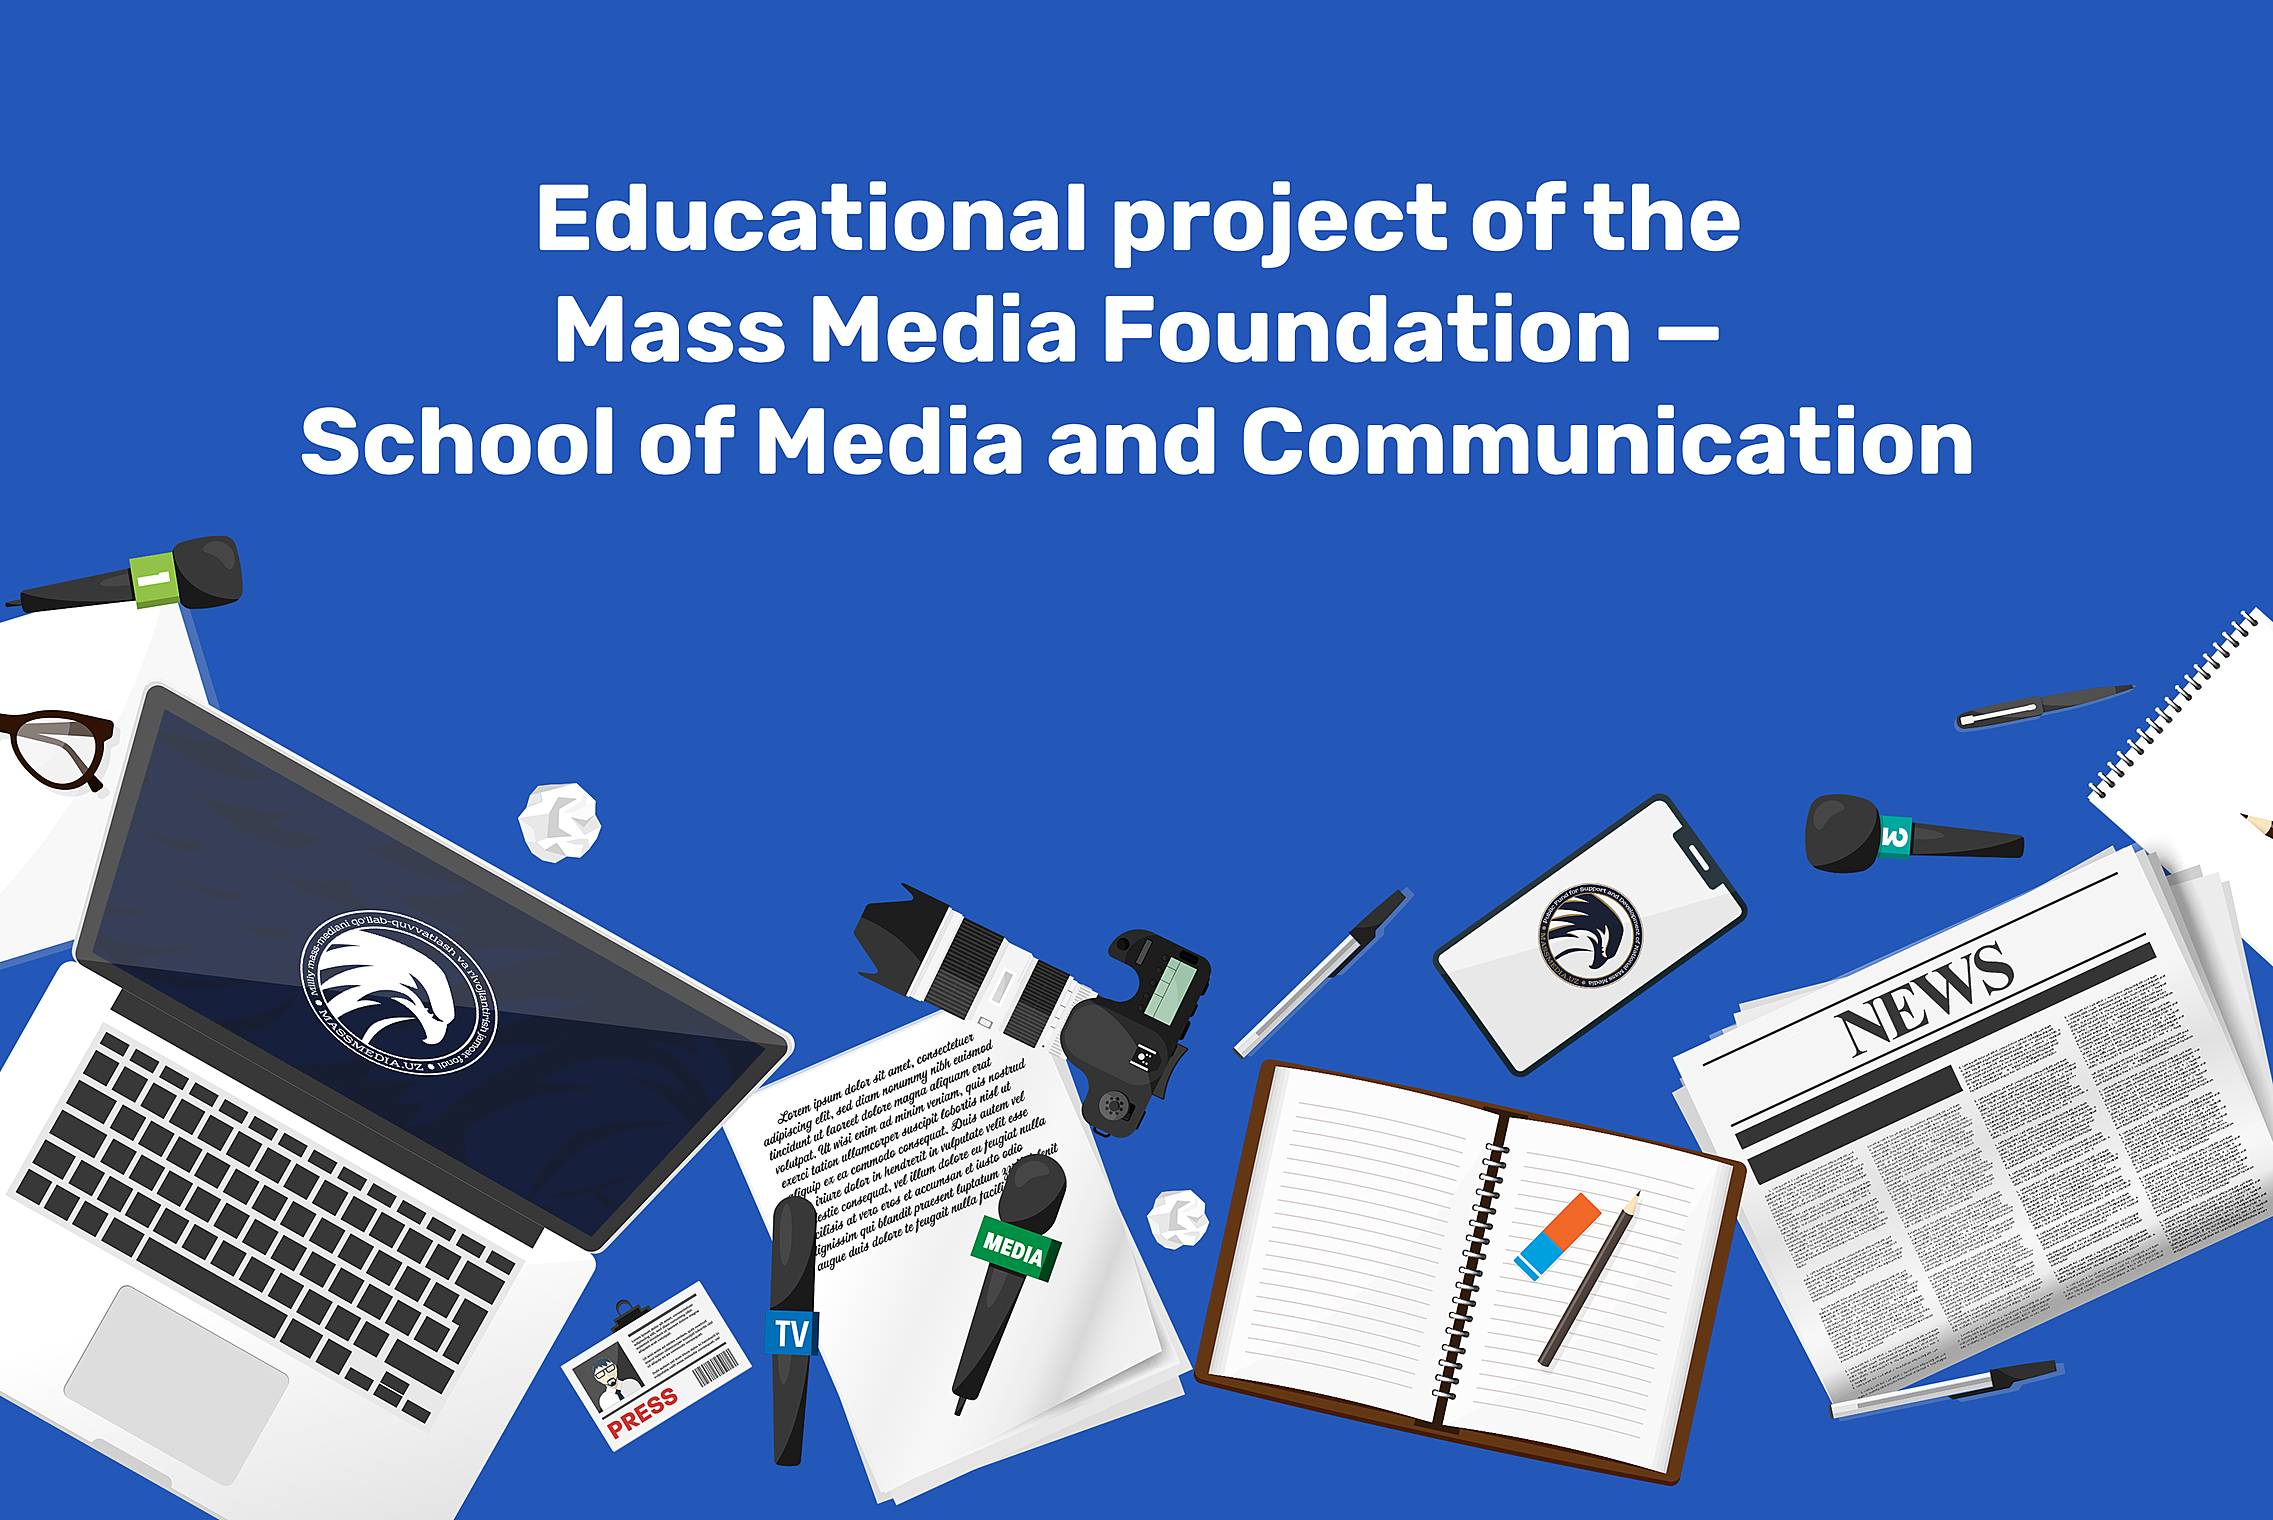 School of Media and Communication